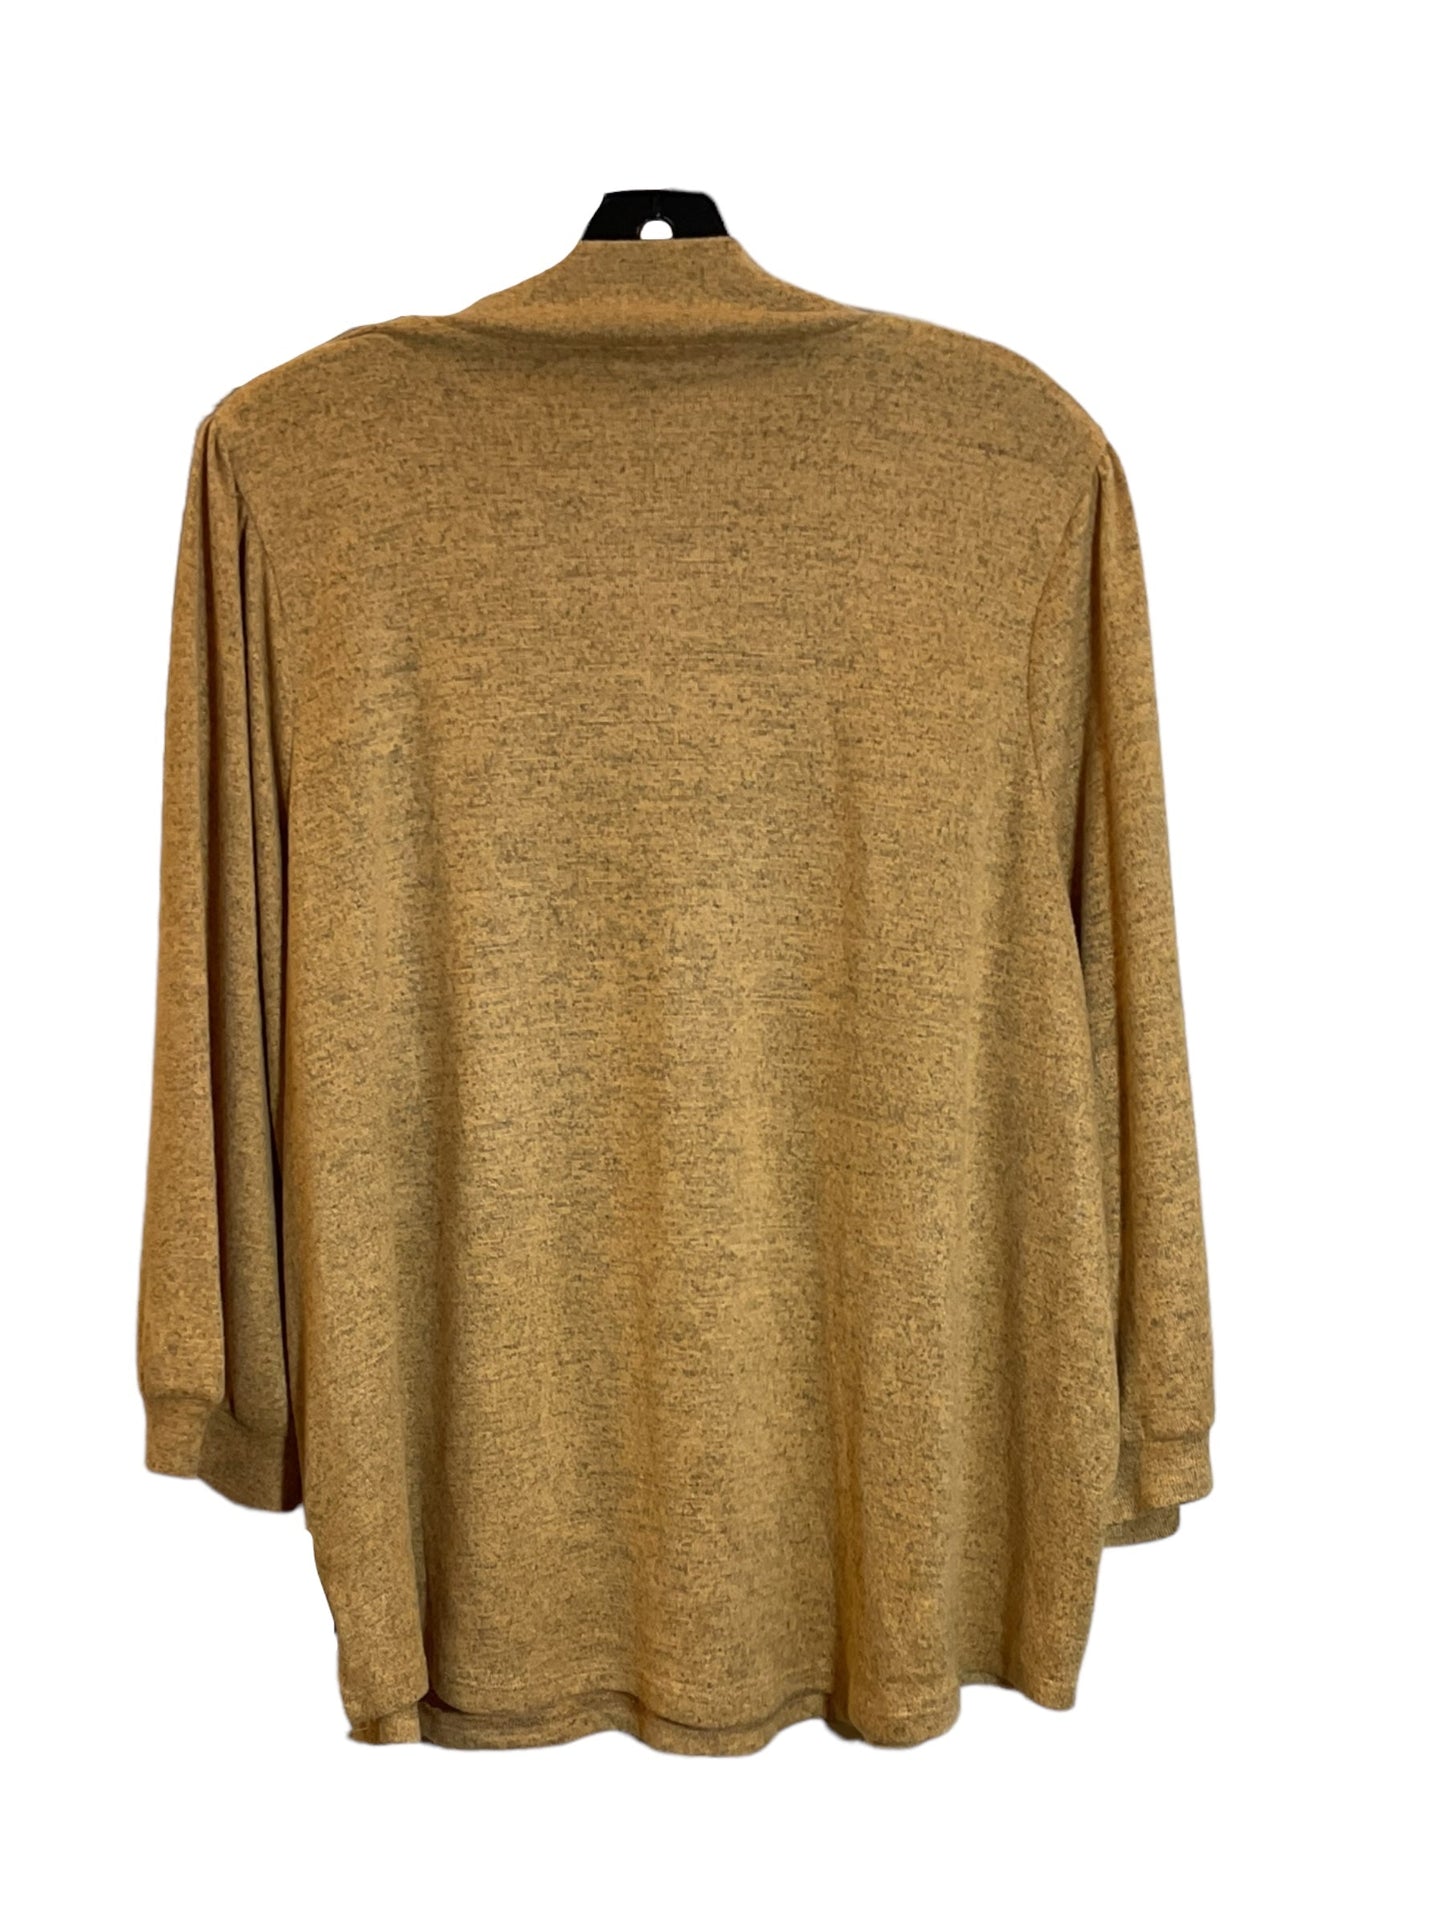 Top Long Sleeve By 89th And Madison  Size: 2x